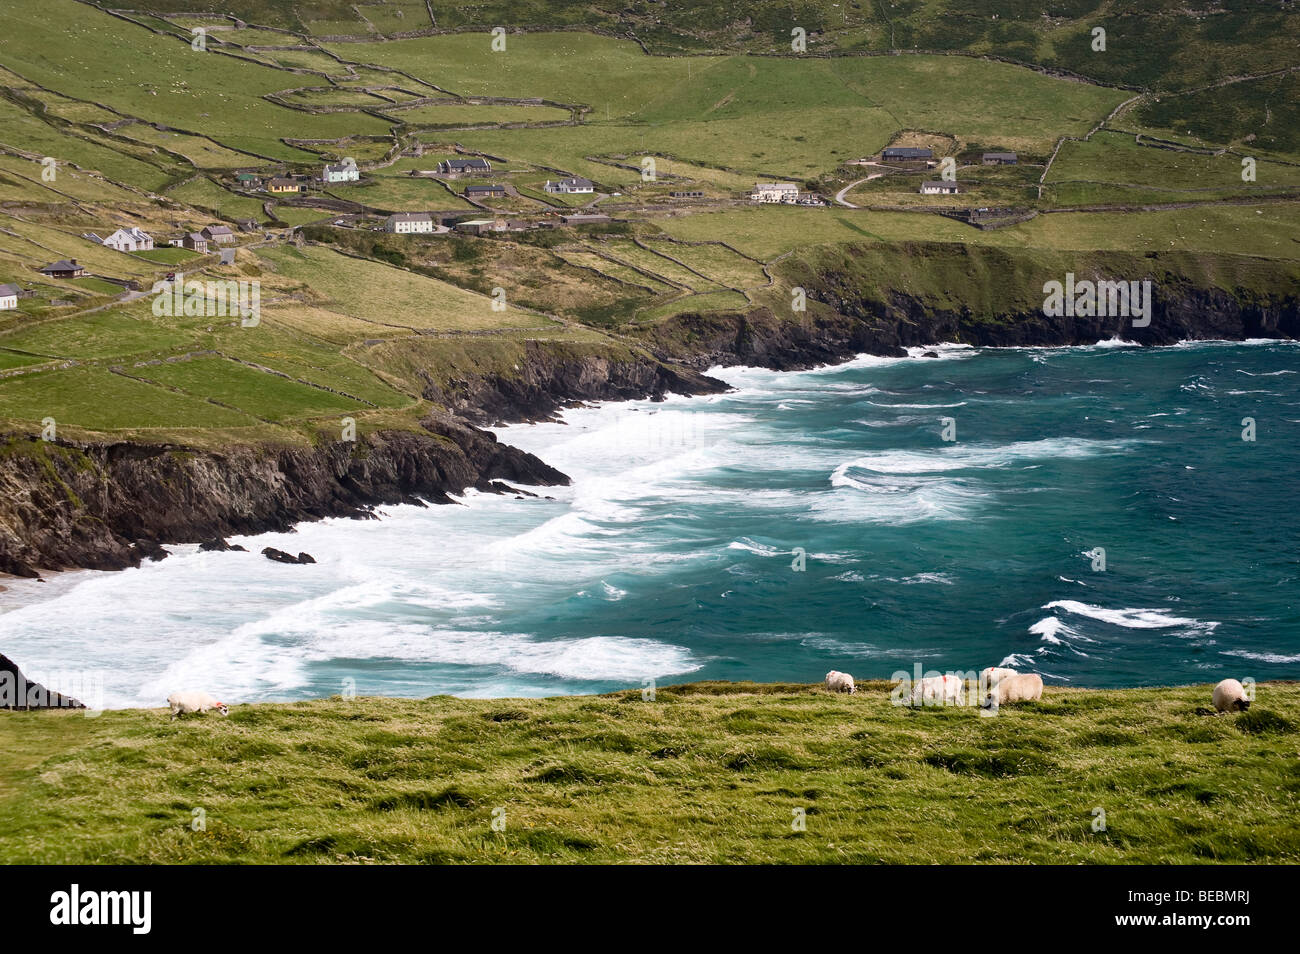 Coumeenoole Beach, Dingle Peninsula, Co Kerry, Irlande Banque D'Images